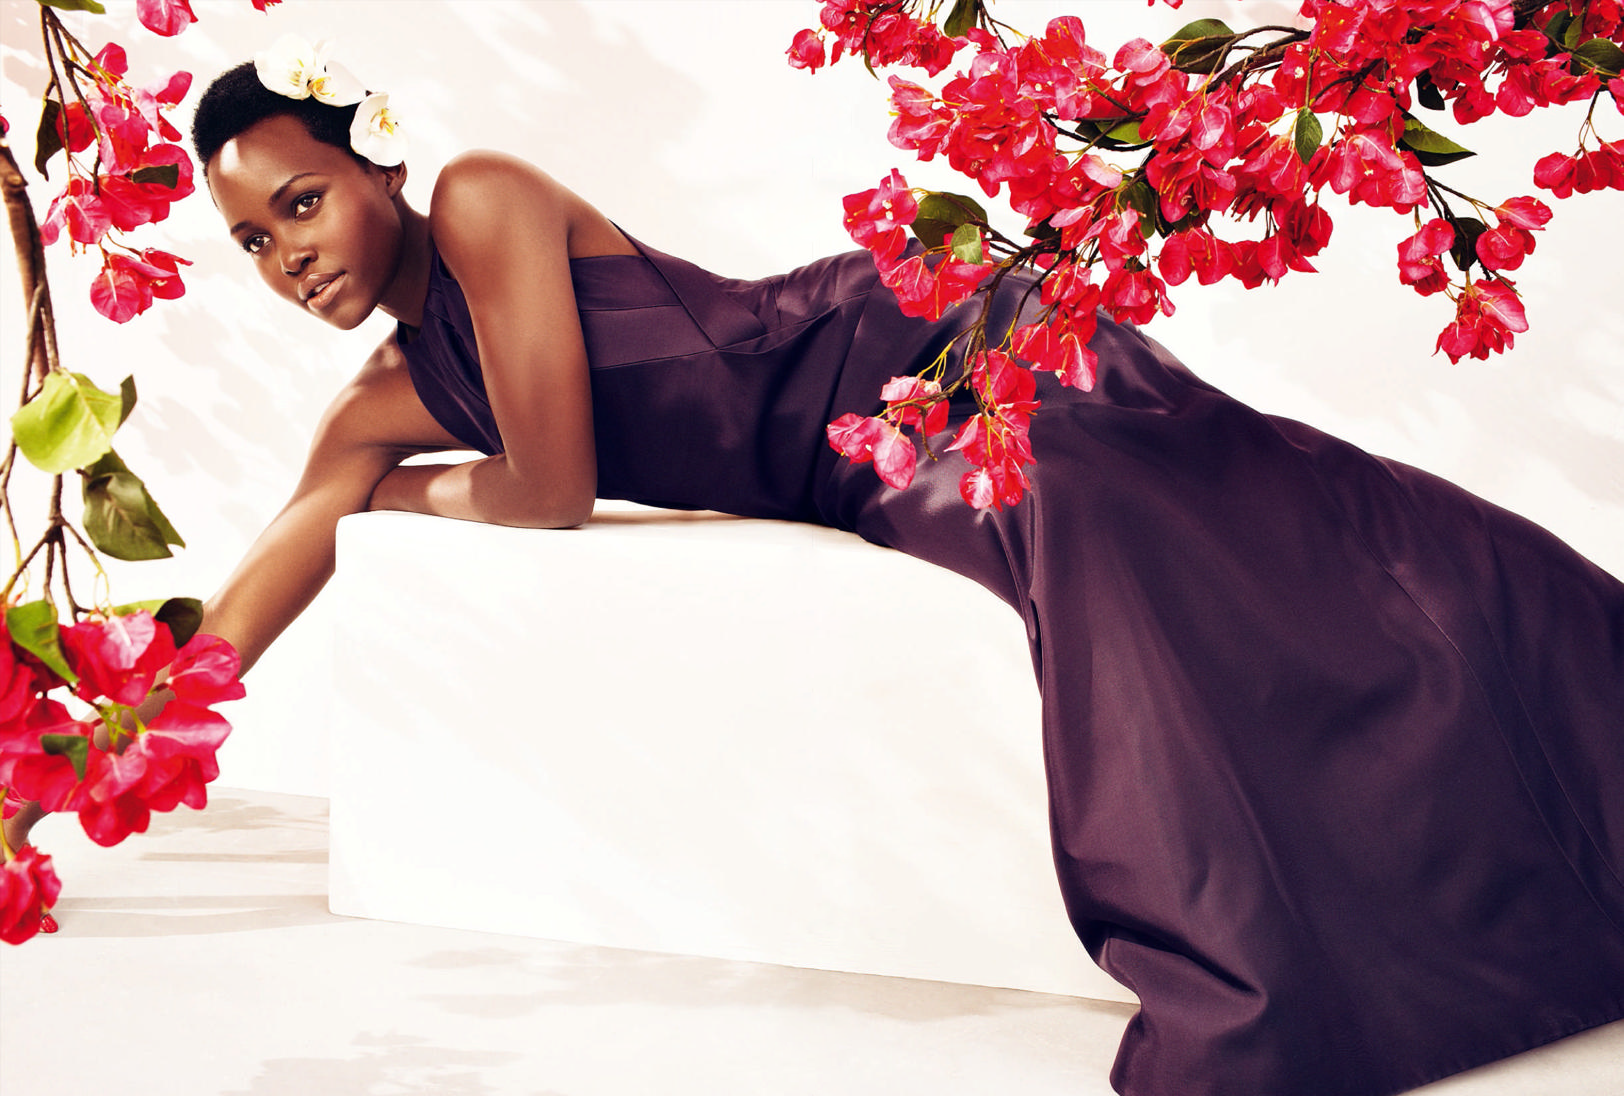 lupita-nyongo-by-alexi-lubomirski-for-harpers-bazaar-uk-may-2015-6.png